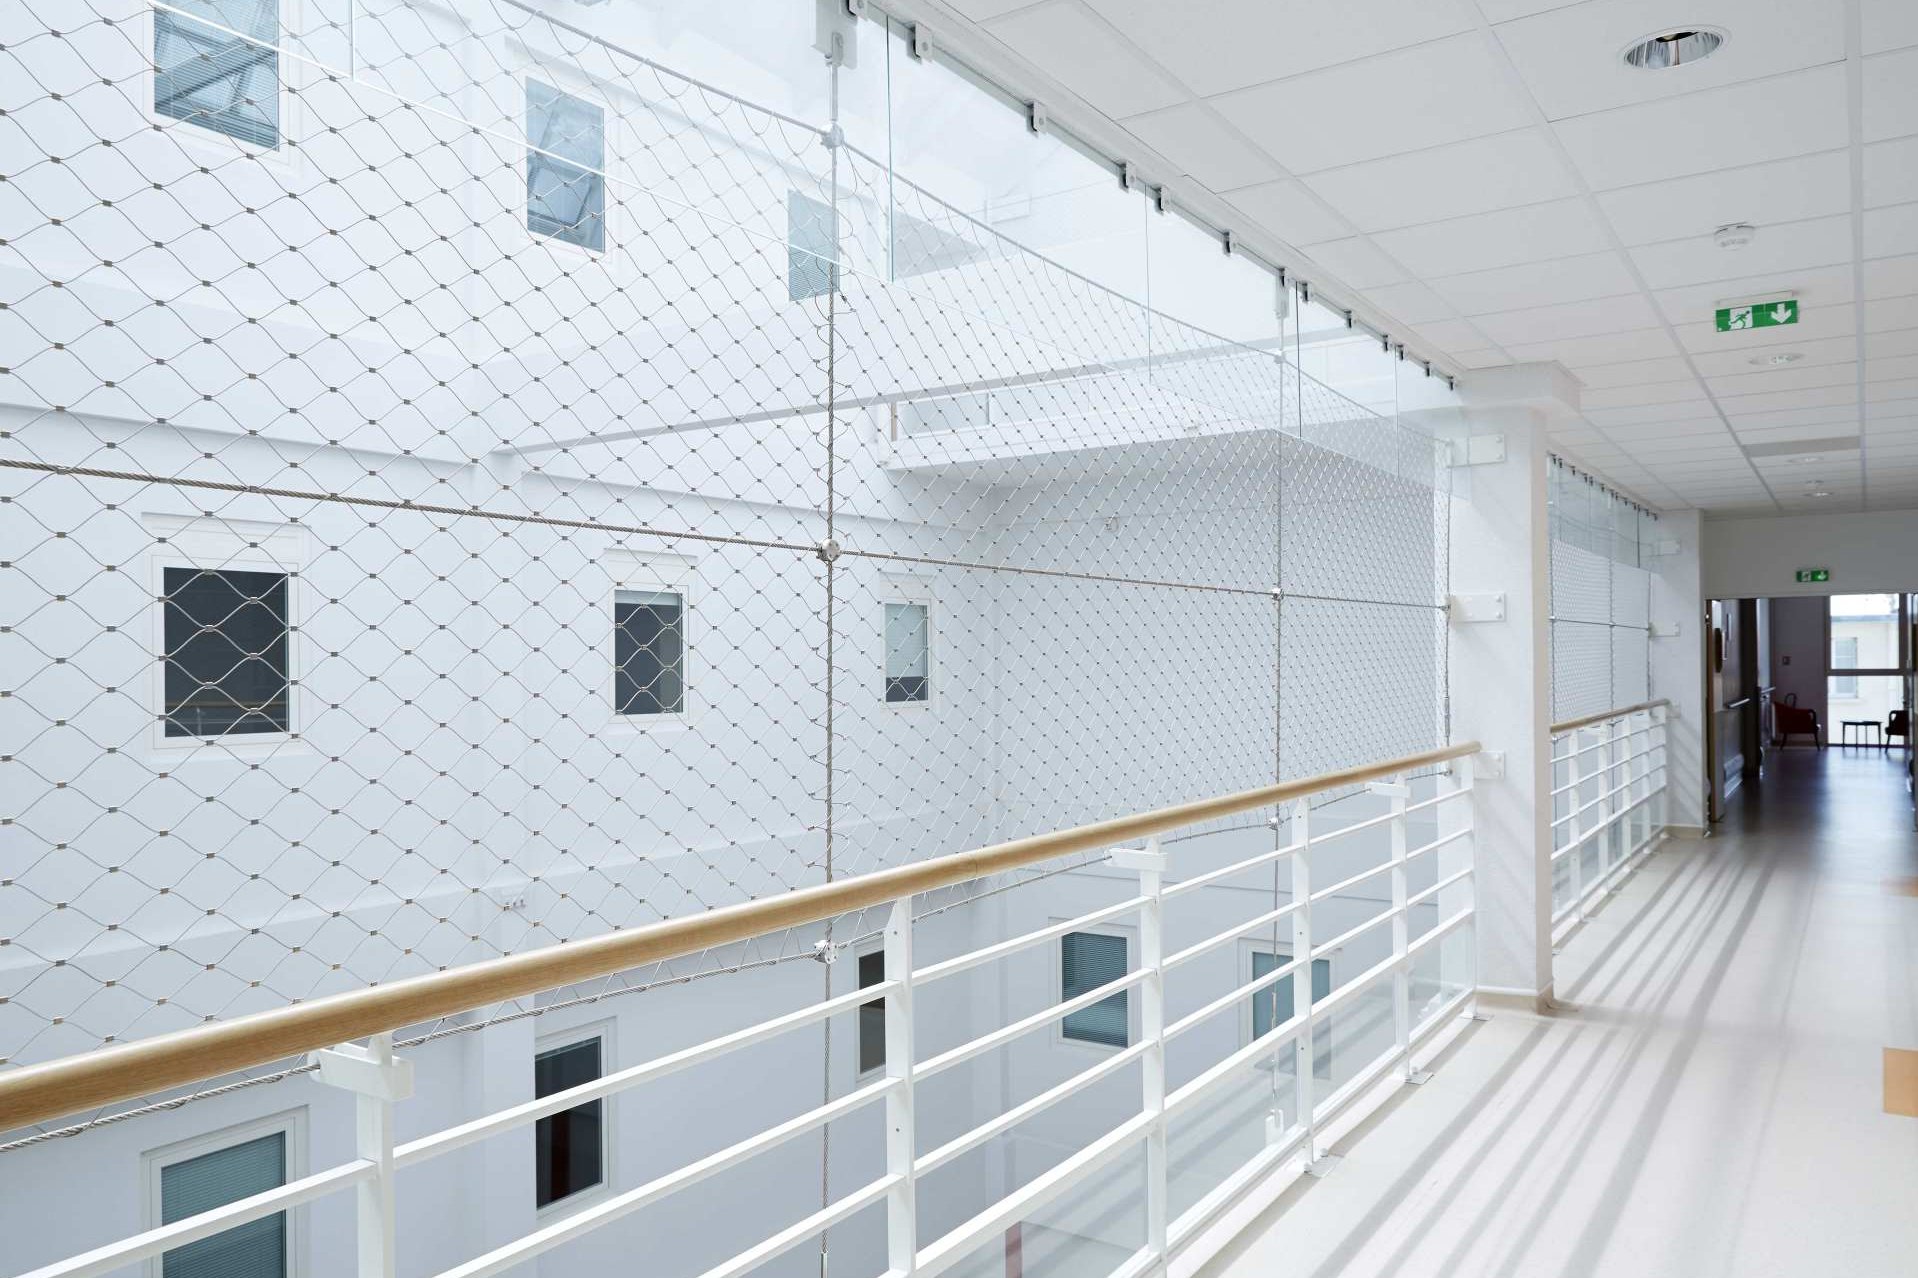 A Webnet security mesh on top of a balustrade in the rehab centre l’adapt in Châtillon, France